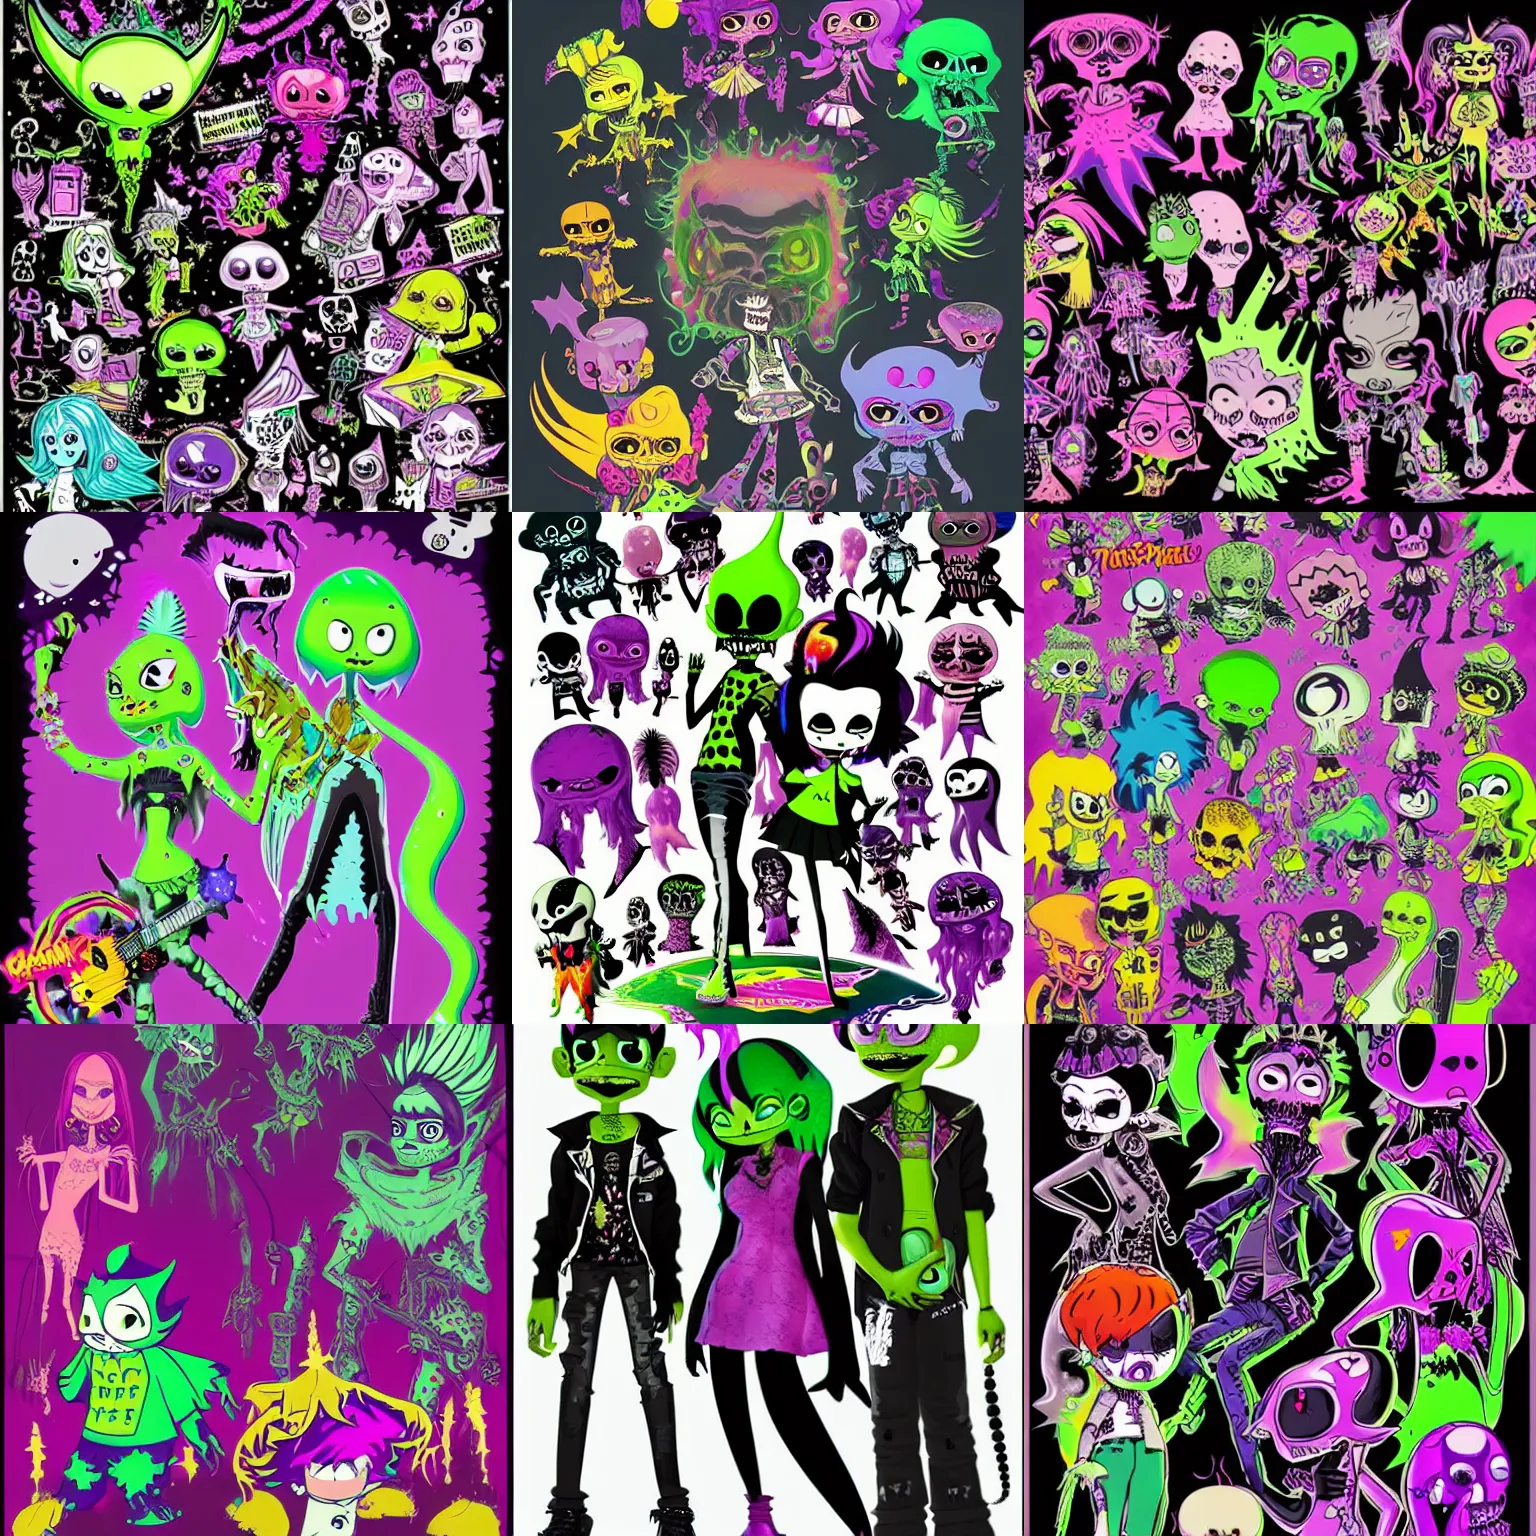 Prompt: lisa frank gothic punk toxic glow in the dark bones vampiric rockstar vampire squid concept character designs of various shapes and sizes by genndy tartakovsky and the creators of fret nice at pieces interactive and splatoon by nintendo and the psychonauts by doublefines tim shafer artists for the new hotel transylvania film managed by pixar and overseen by Jamie Hewlett from gorillaz